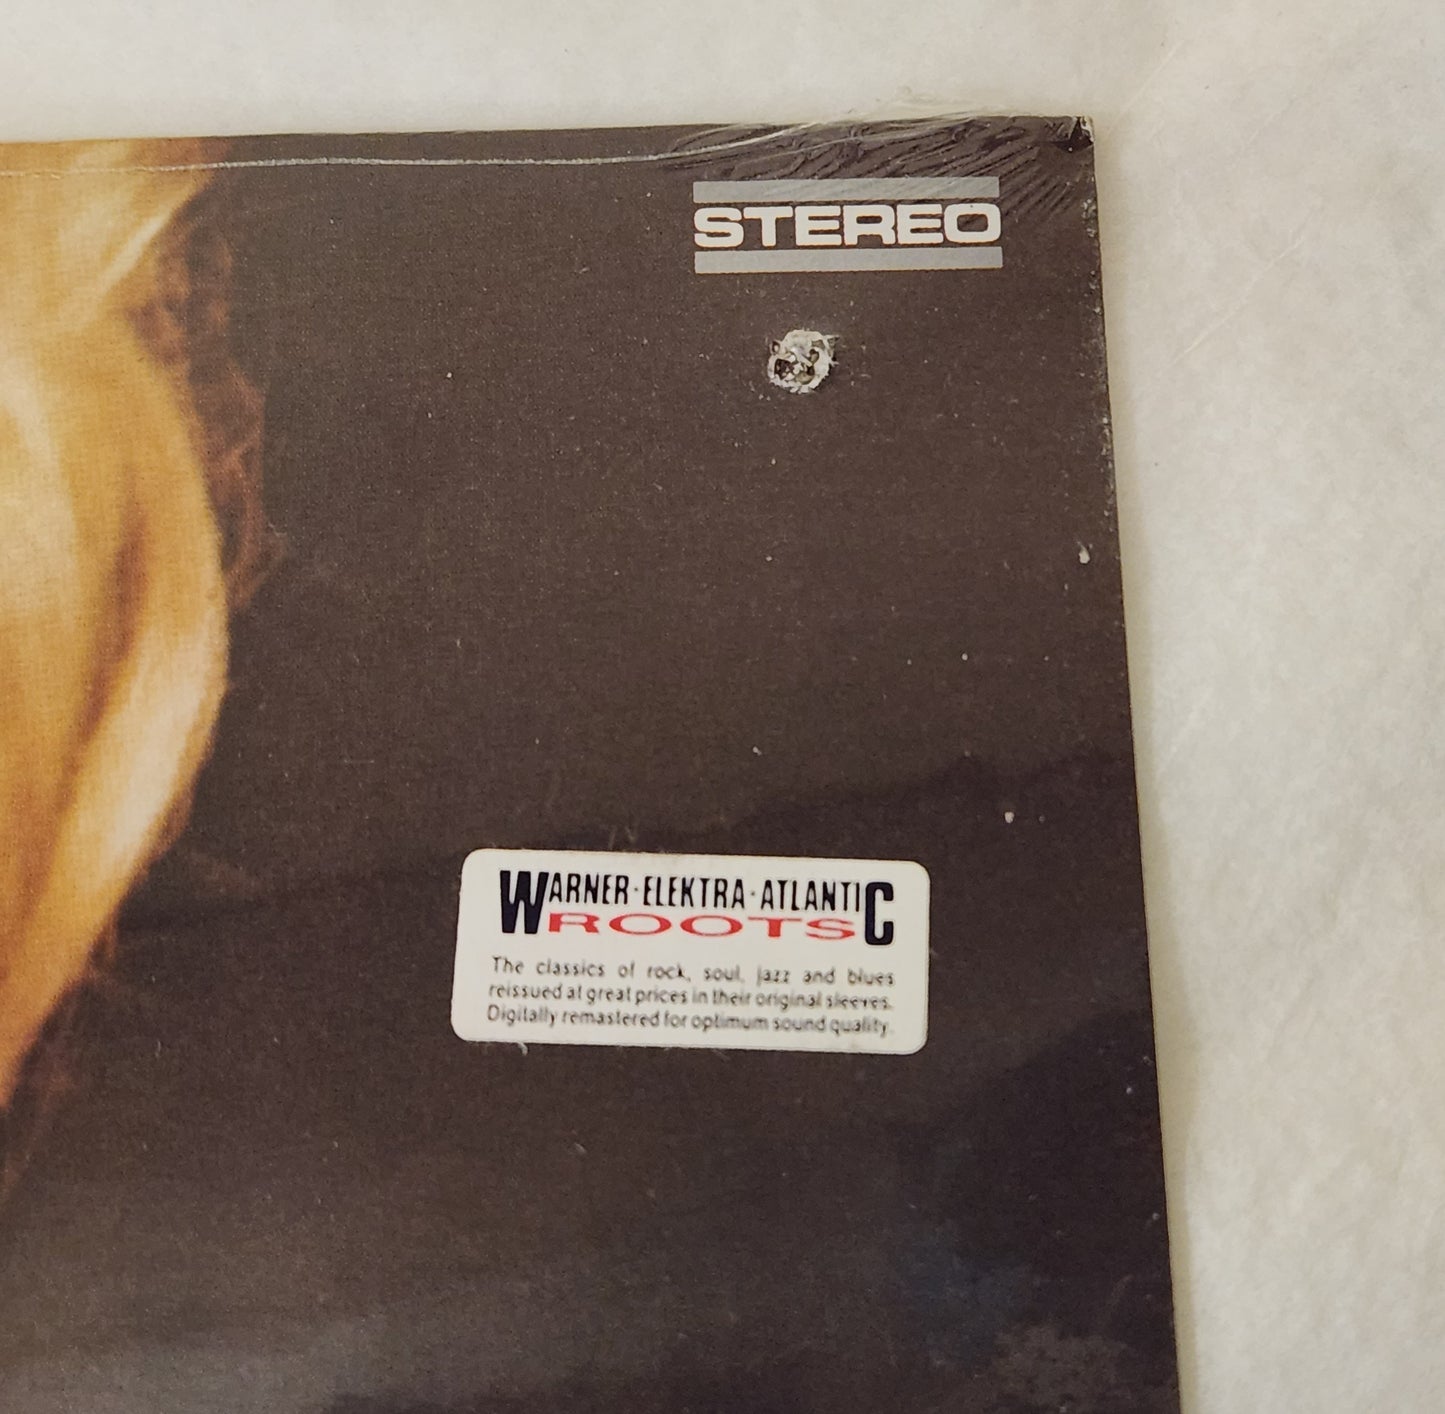 SEALED Dusty Springfield "Dusty In Memphis" 1988 Remastered Reissue Record Album